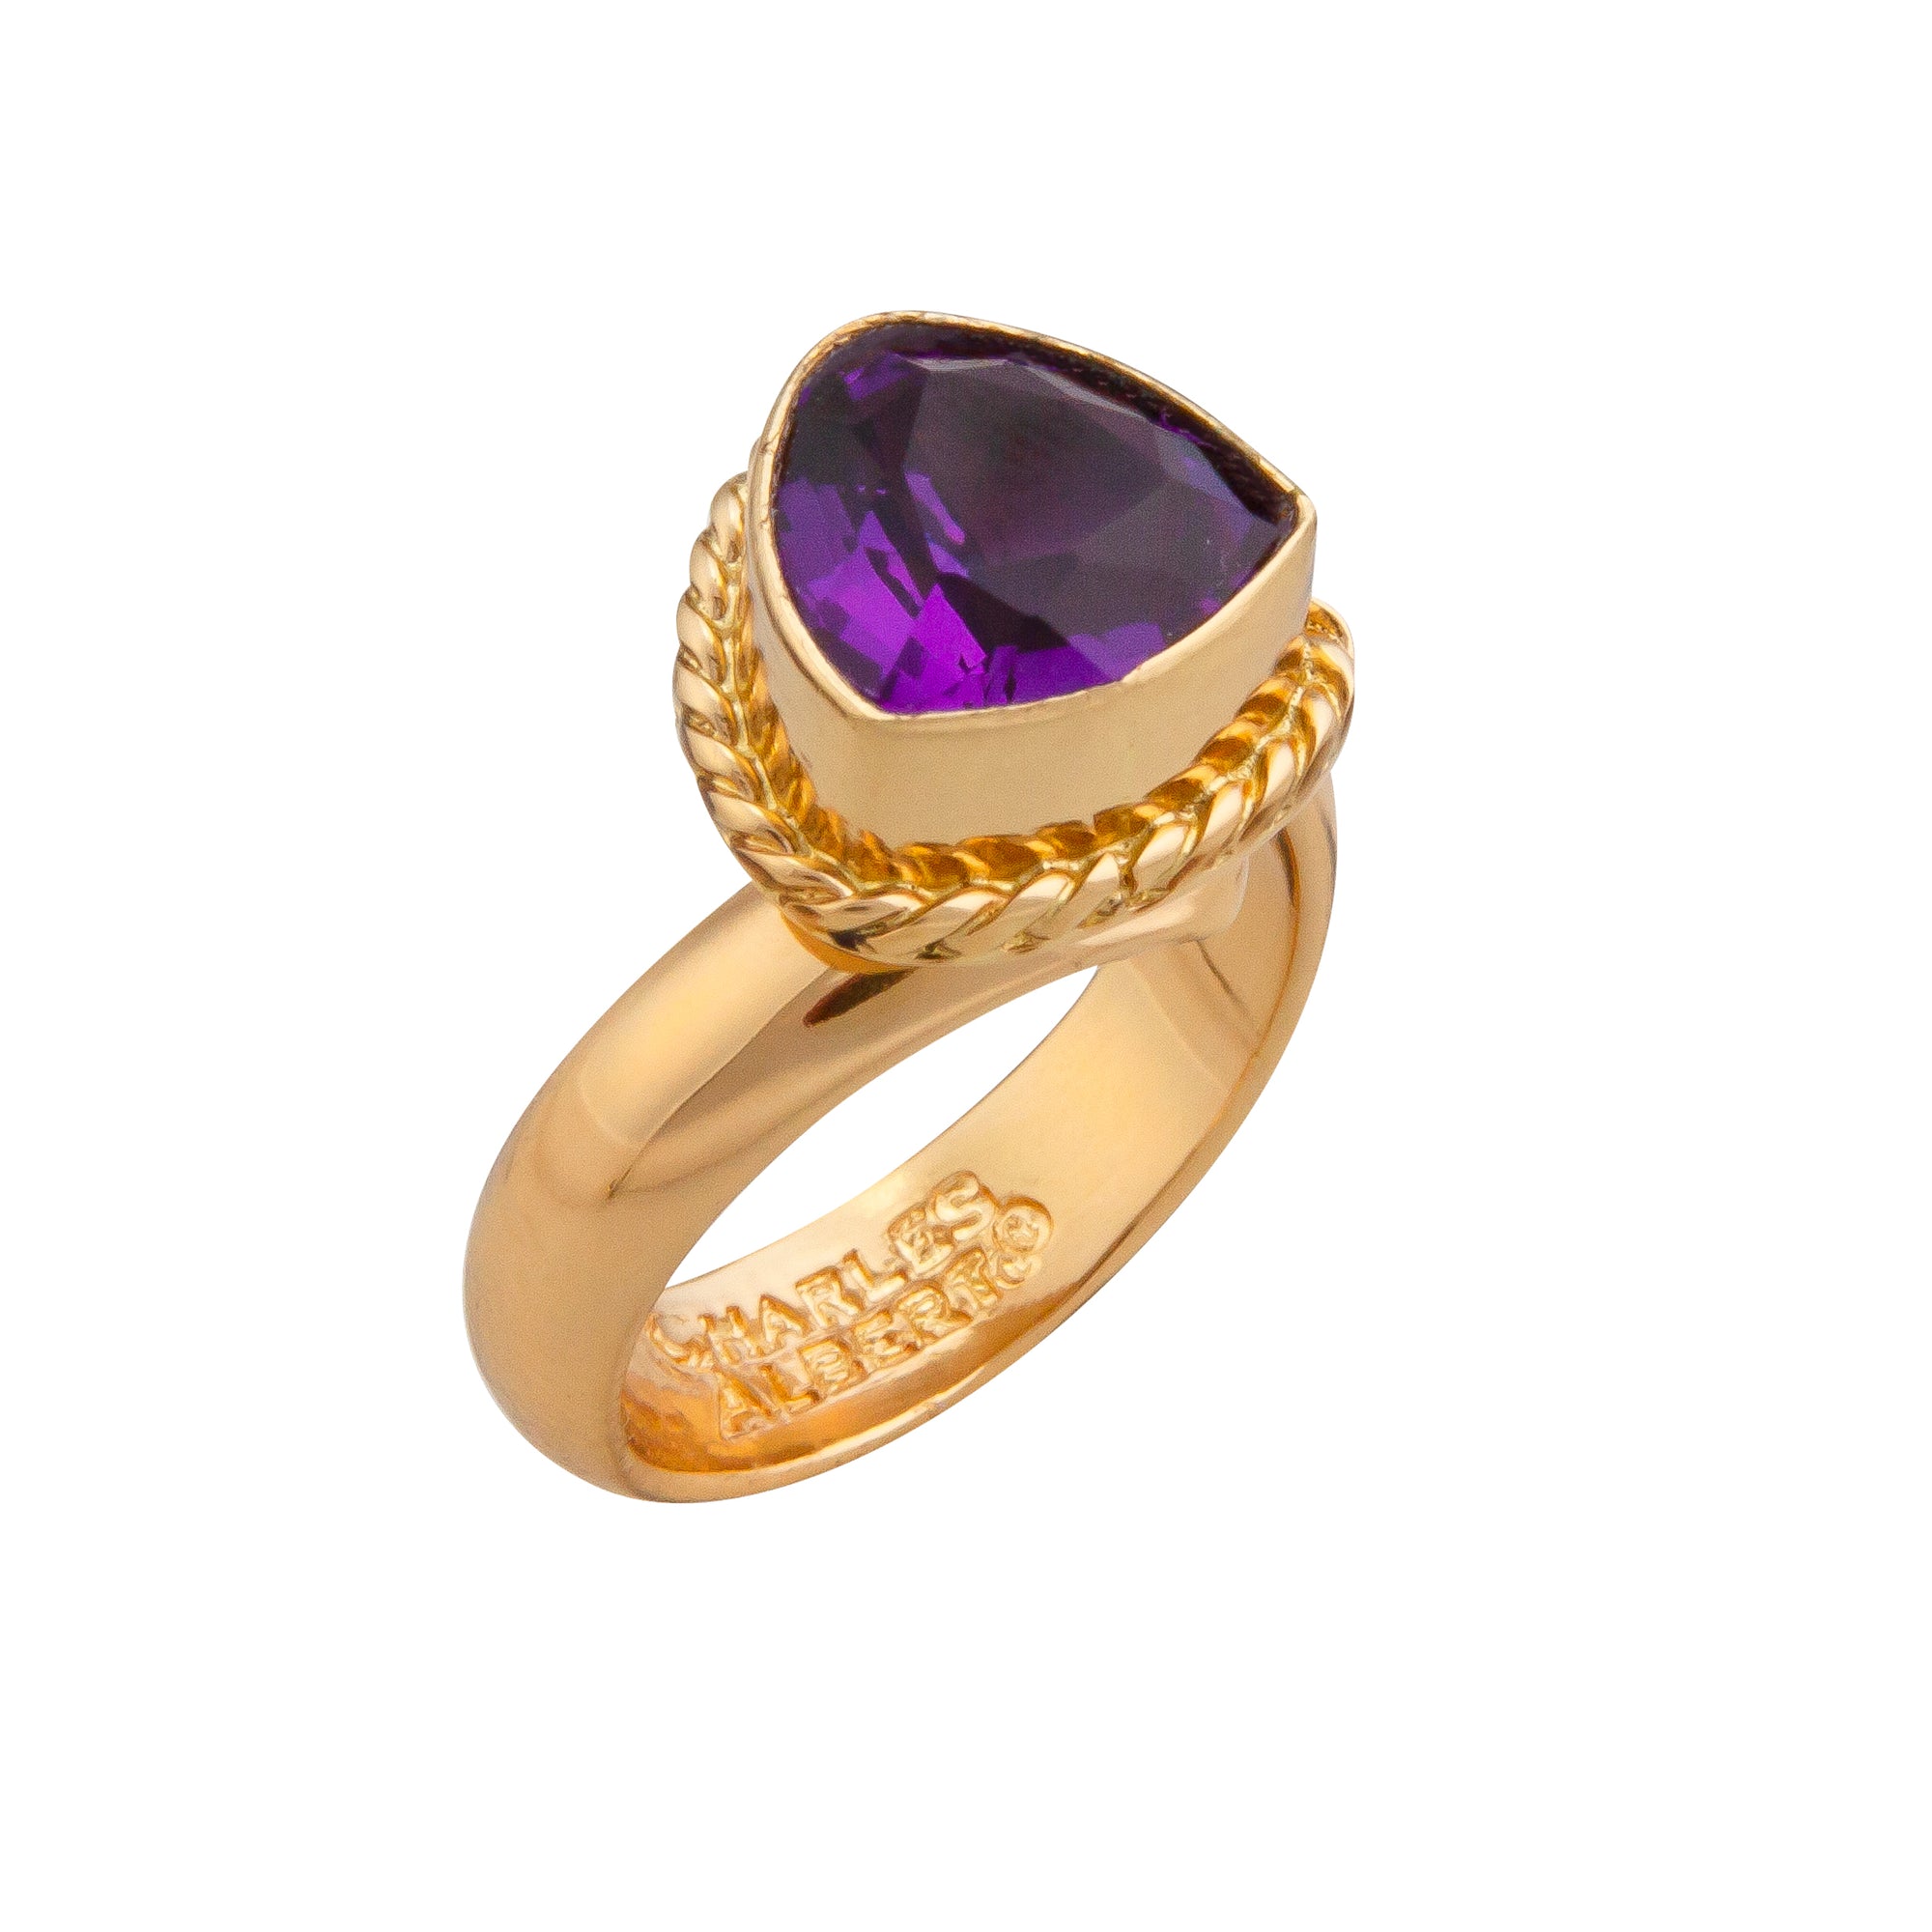 Charles Albert Jewelry - Alchemia Amethyst Trillion Rope Adjustable Ring - Side View